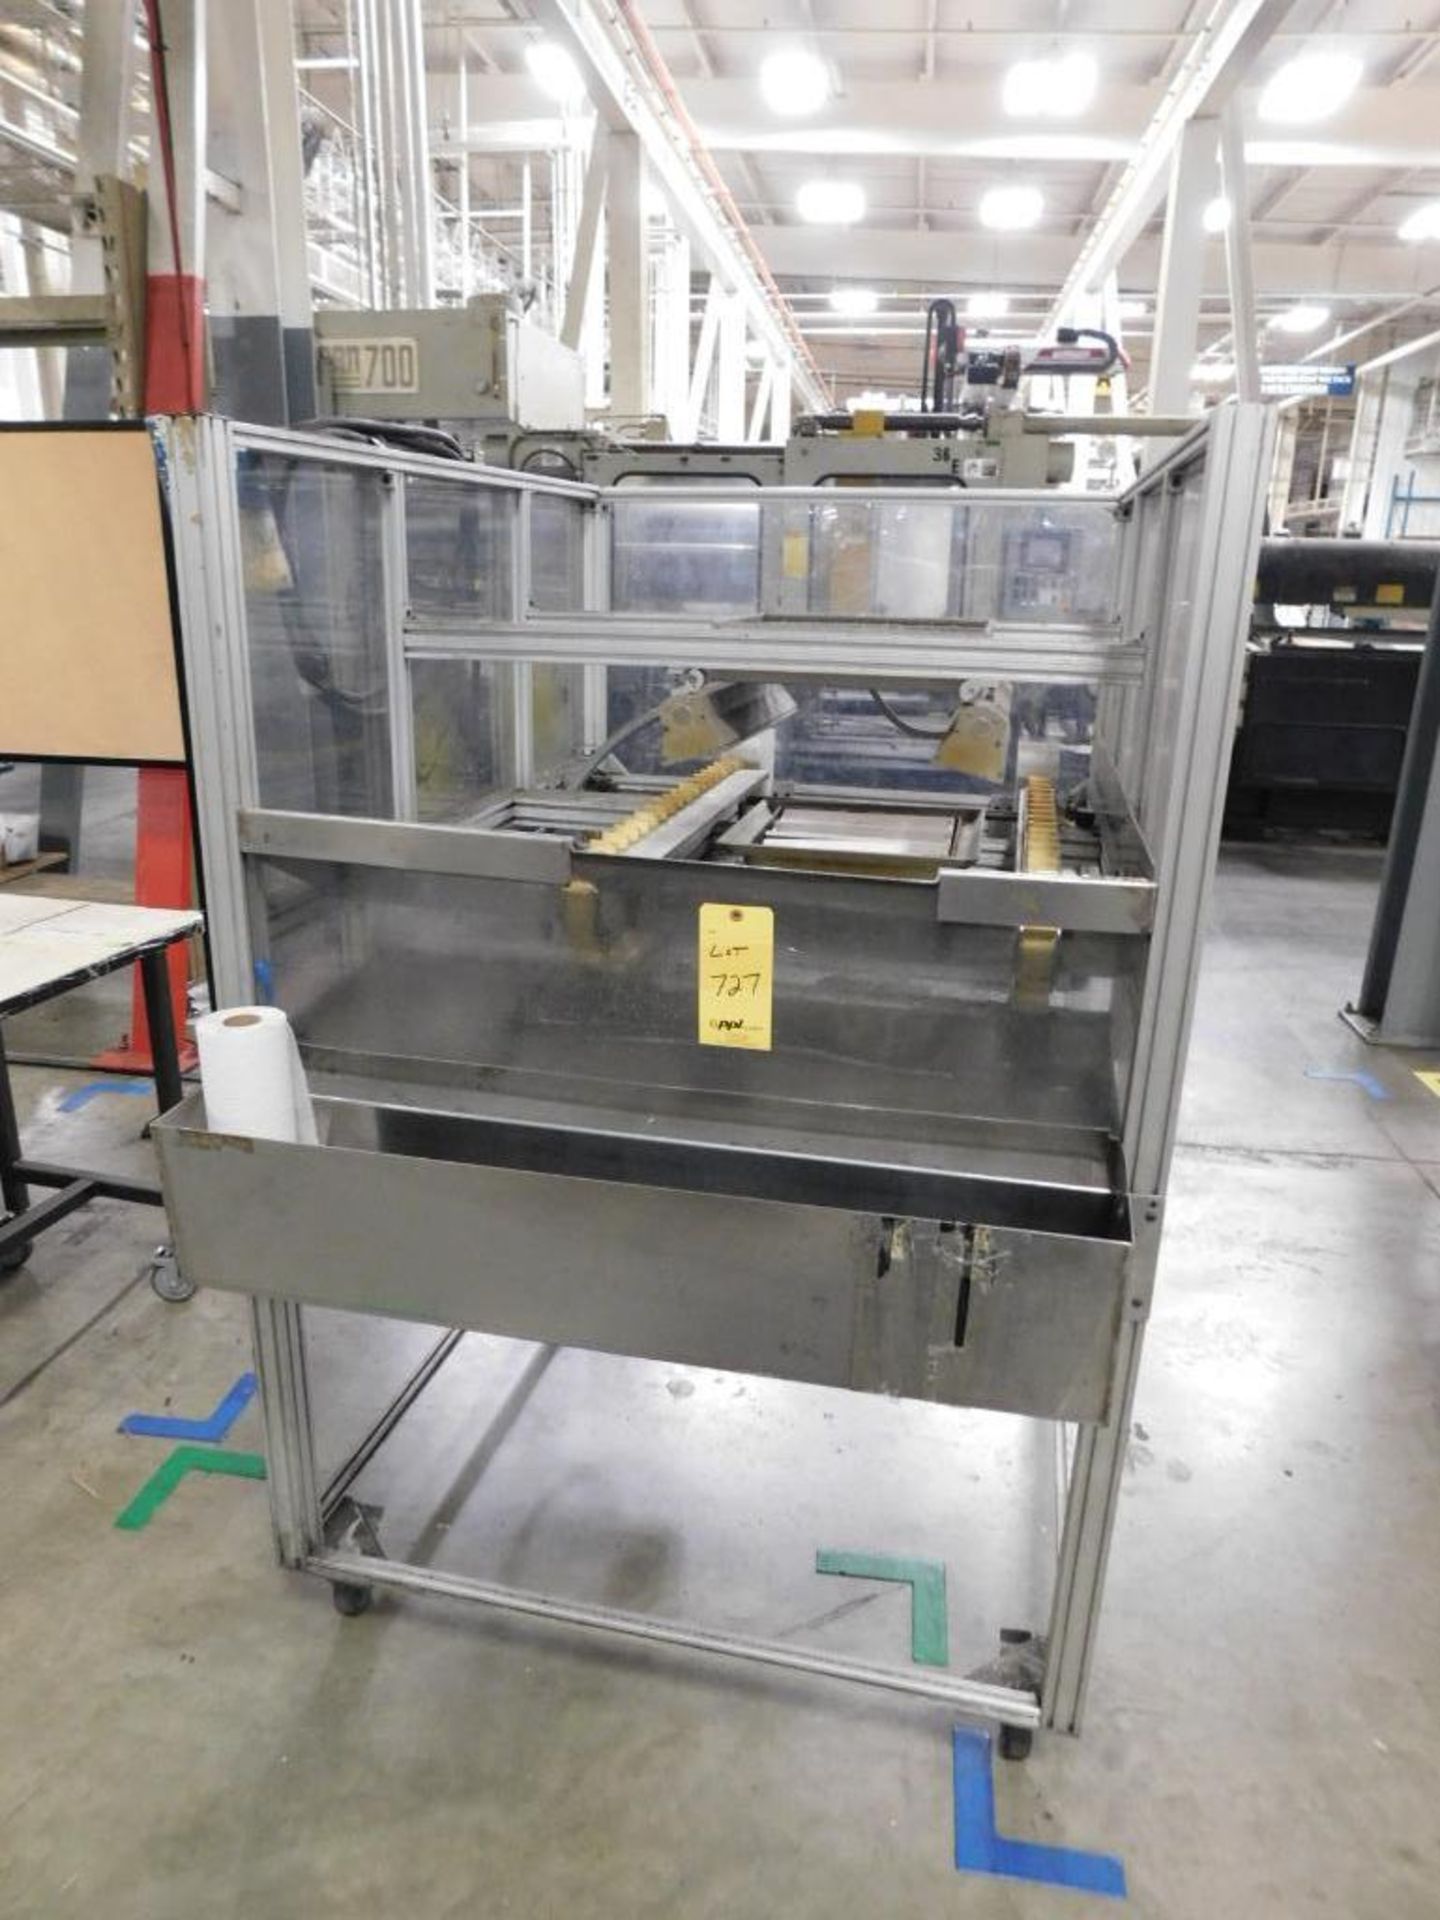 LOT: (8) Work Stations, (2) Punch Presses, (2) Drying Stations, Drilling Station, Glue Station, etc. - Image 15 of 16